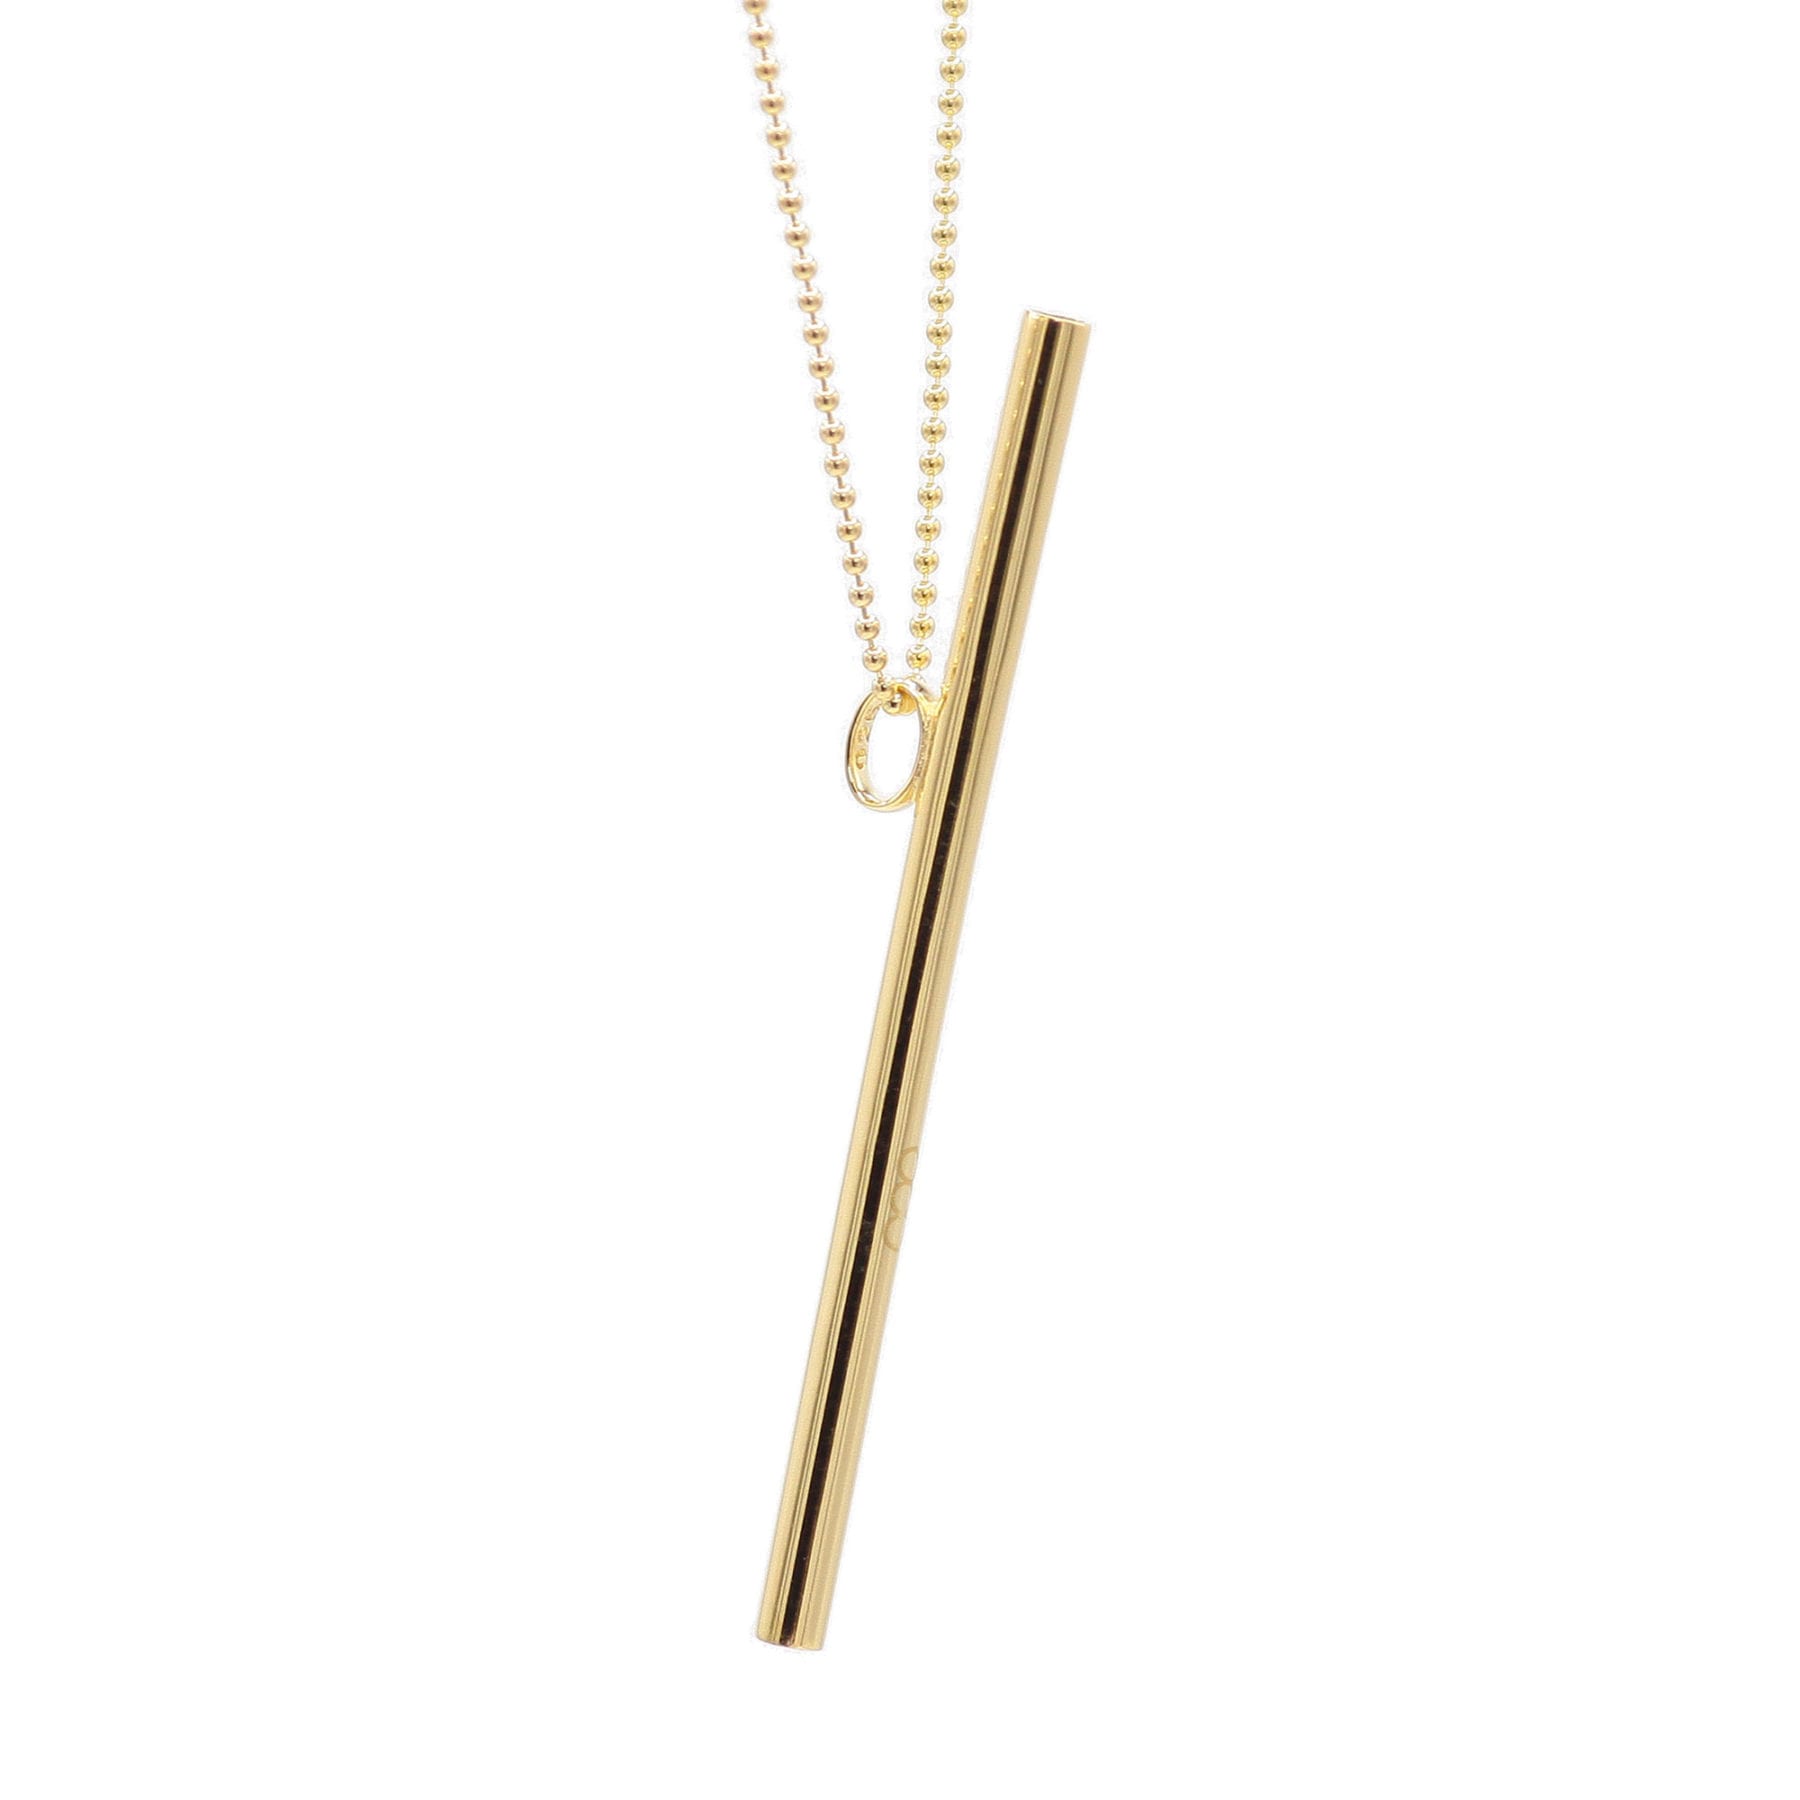 https://oovostraw.com/wp-content/uploads/2019/05/OOVO-gold-vocal-straw-phonation-necklace-side-view.jpg